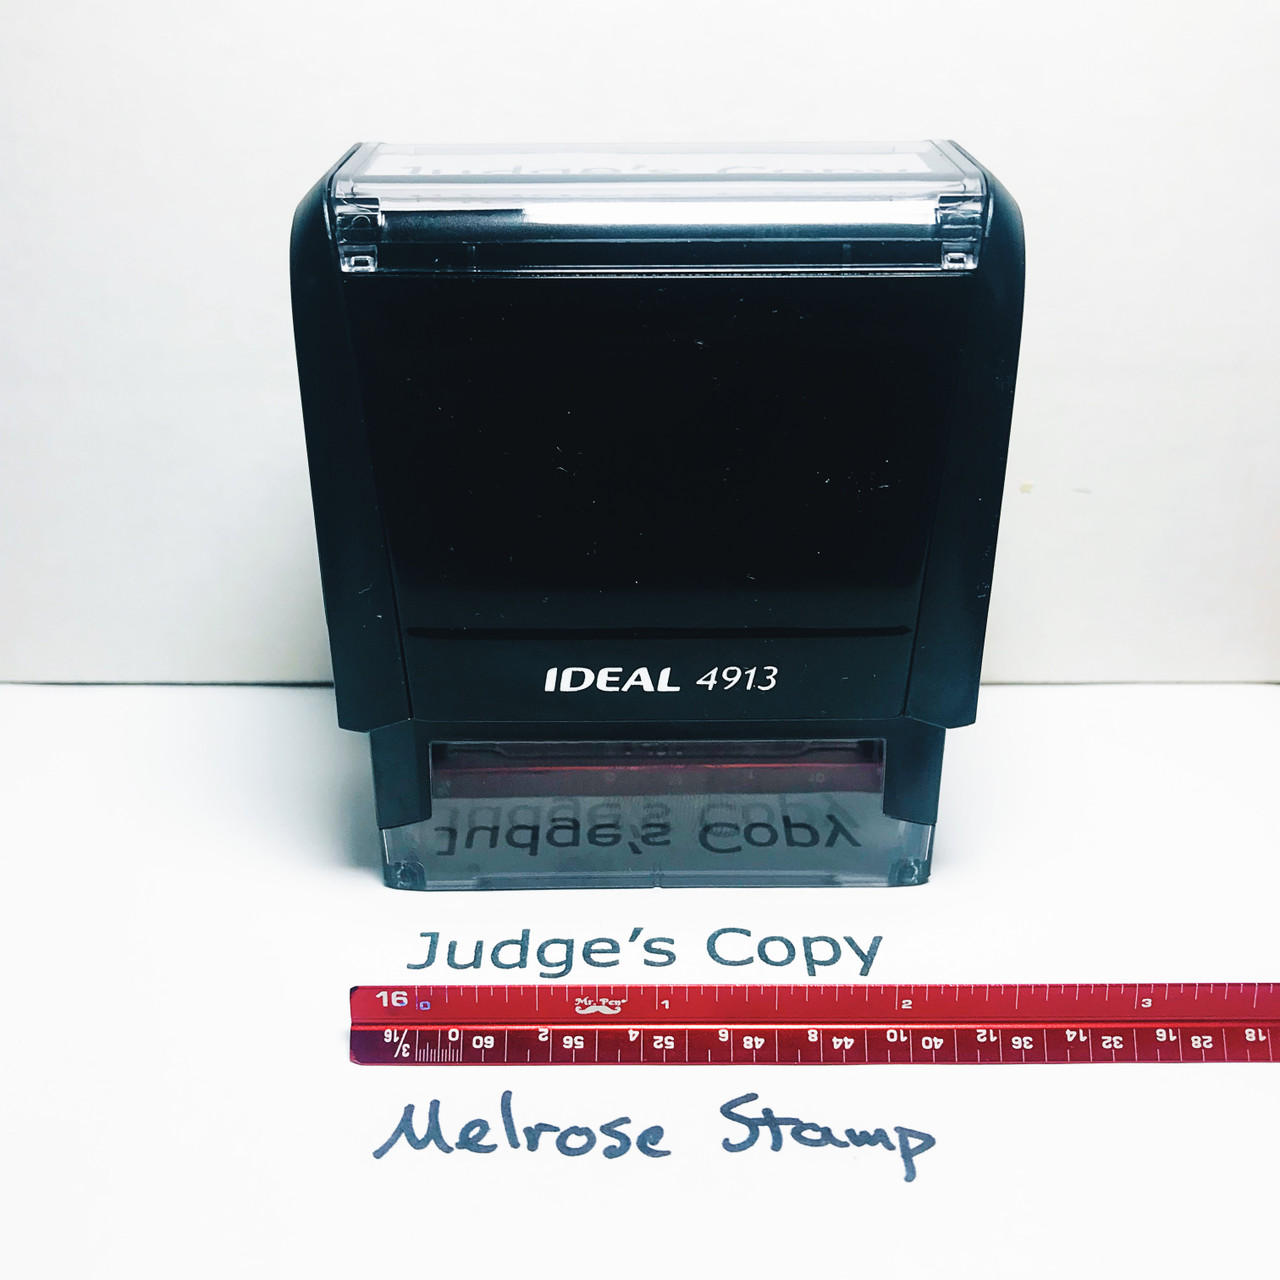 JUDGE'S COPY Rubber Stamp for office use self-inking